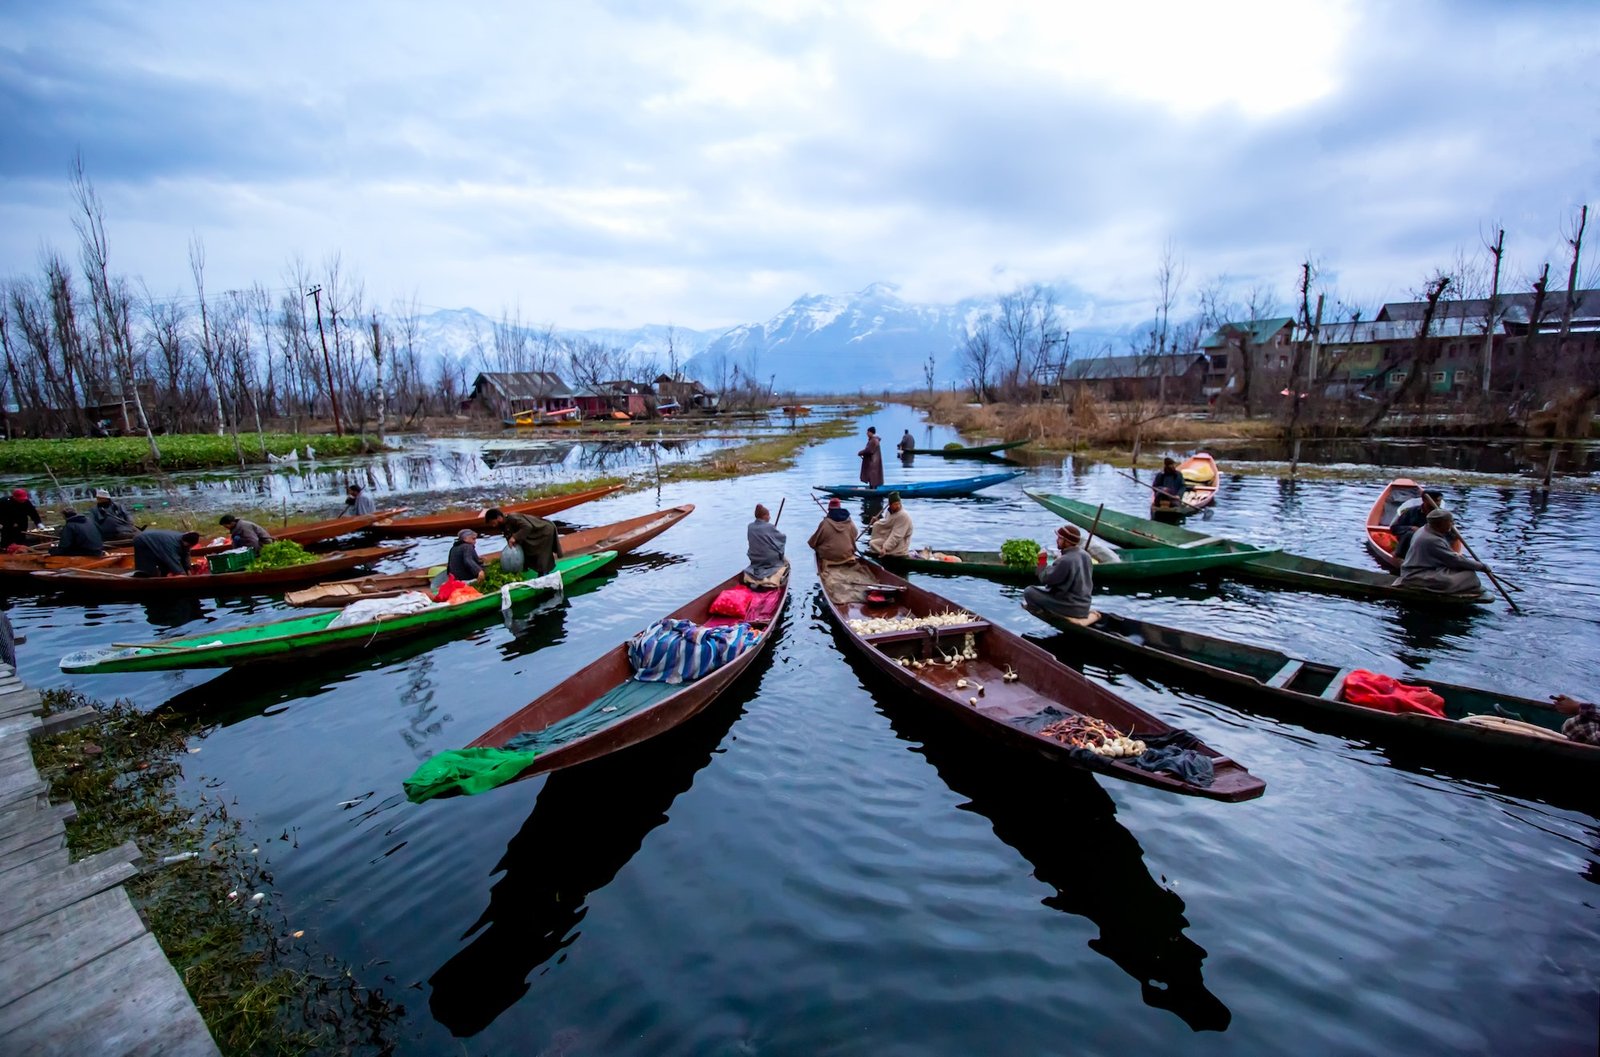 Morning market with boats at Kashmir